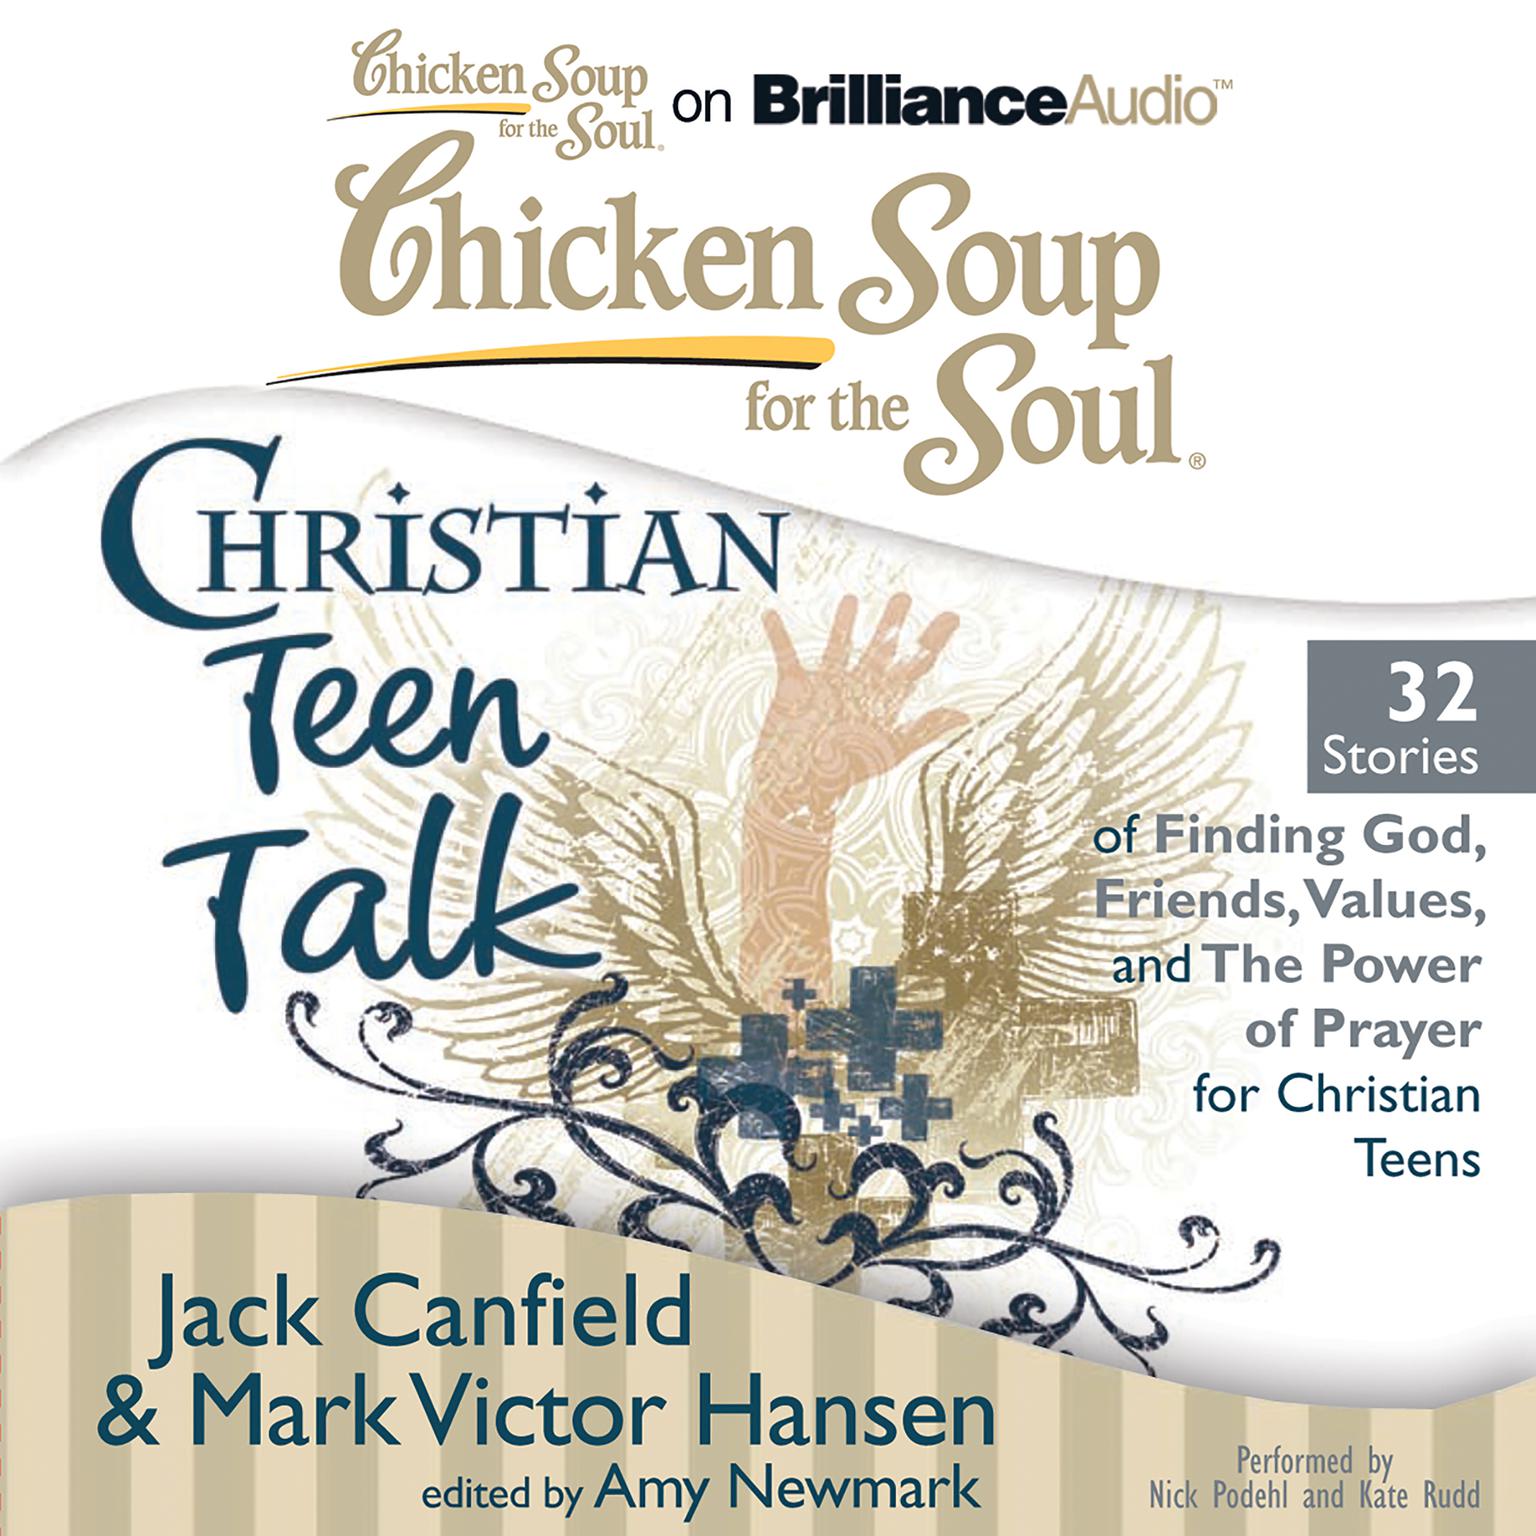 Chicken Soup for the Soul: Christian Teen Talk - 32 Stories of Finding God, Friends, Values, and the Power of Prayer for Christian Teens Audiobook, by Jack Canfield